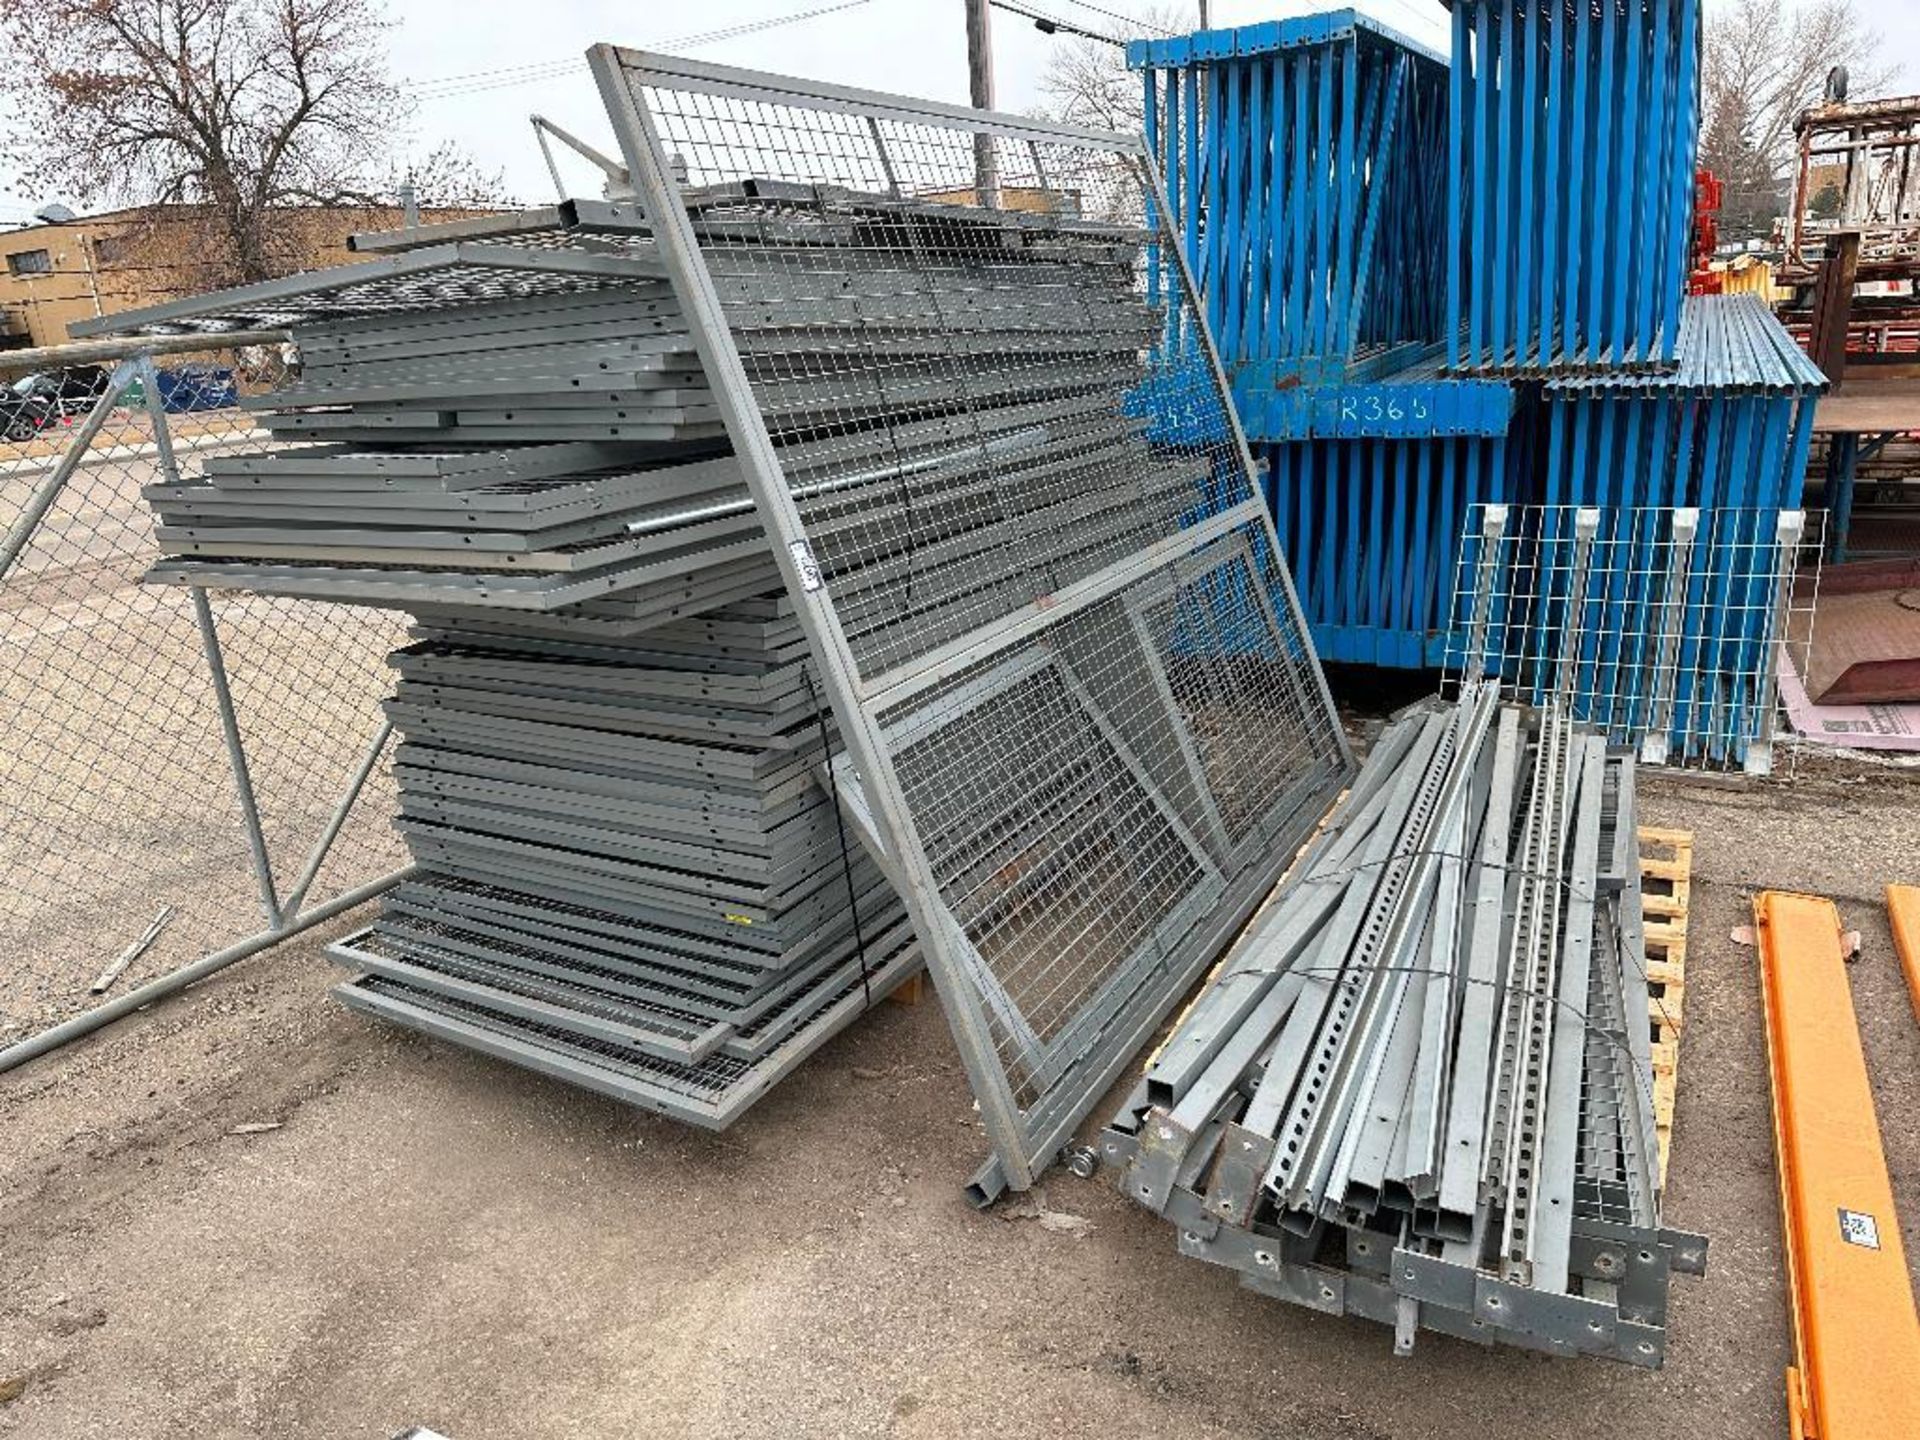 Steel Tool Cage